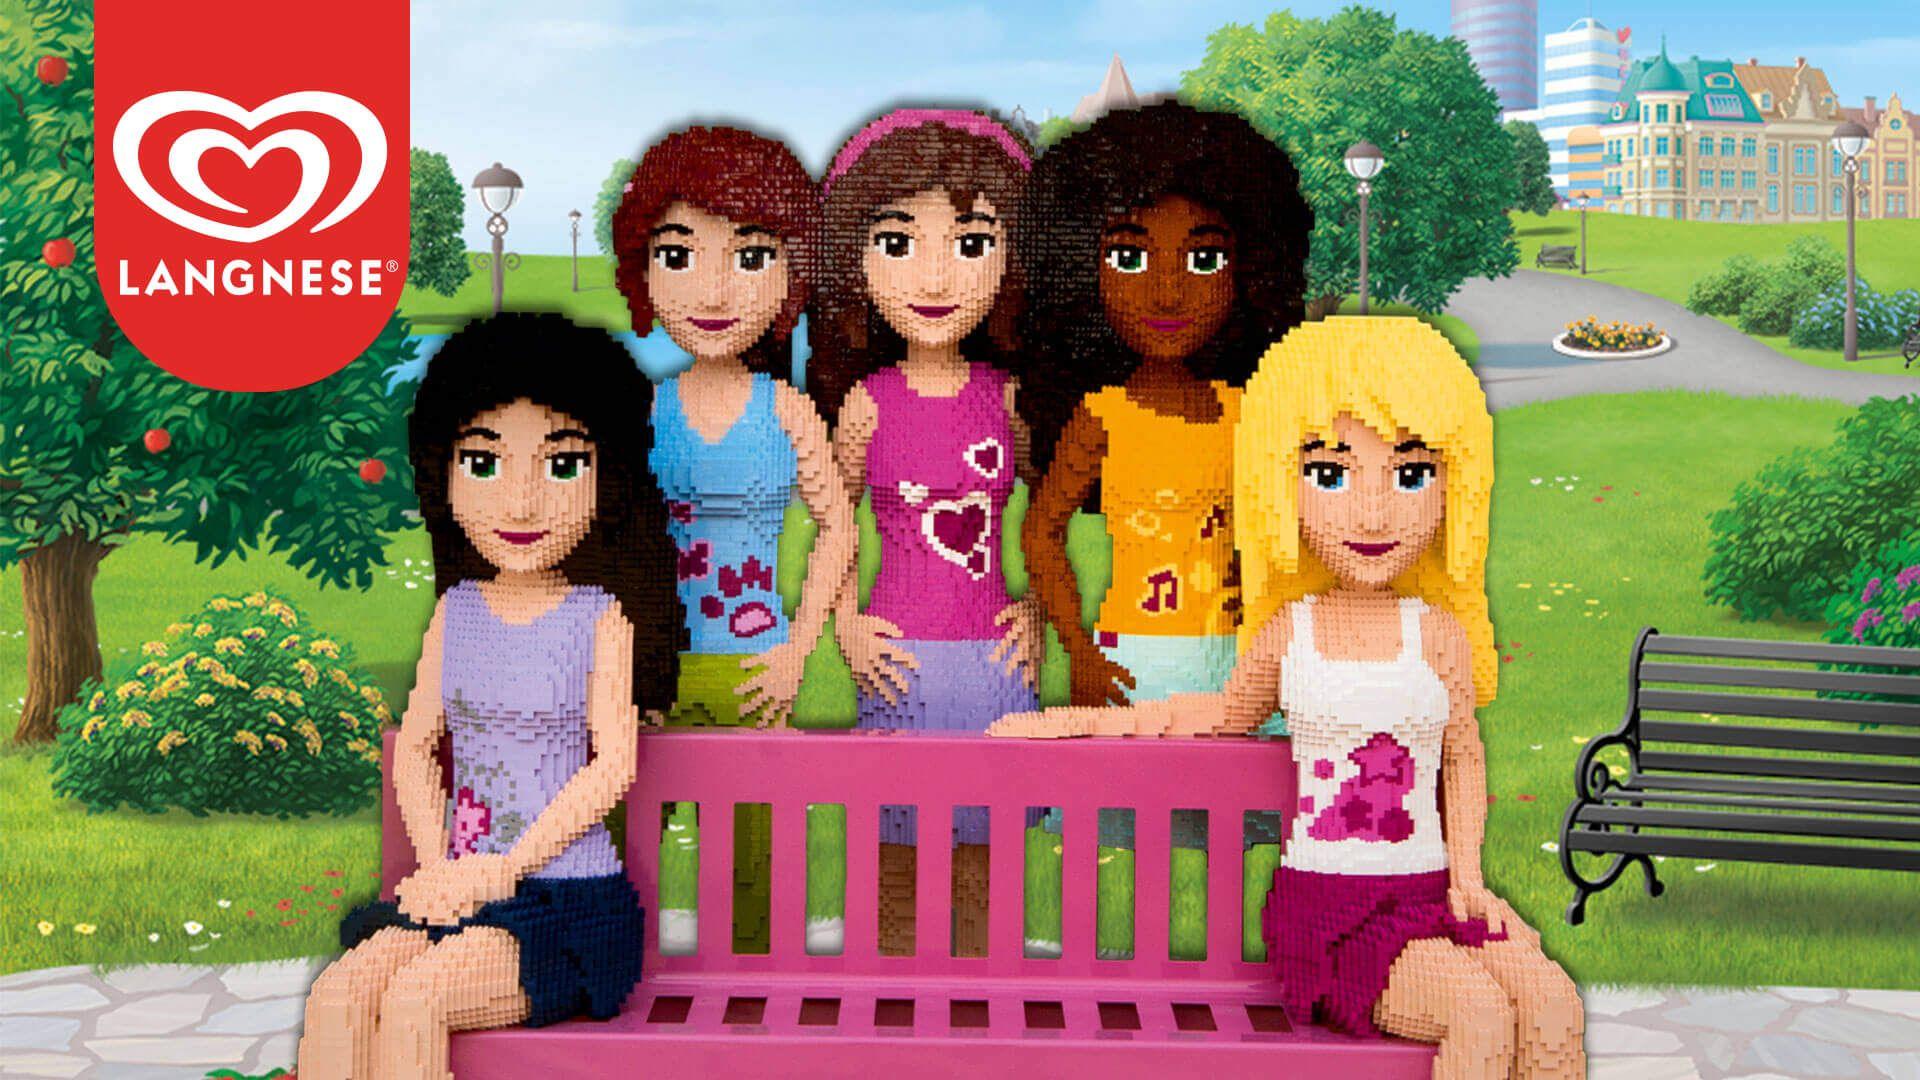 Lego Friends Wallpapers